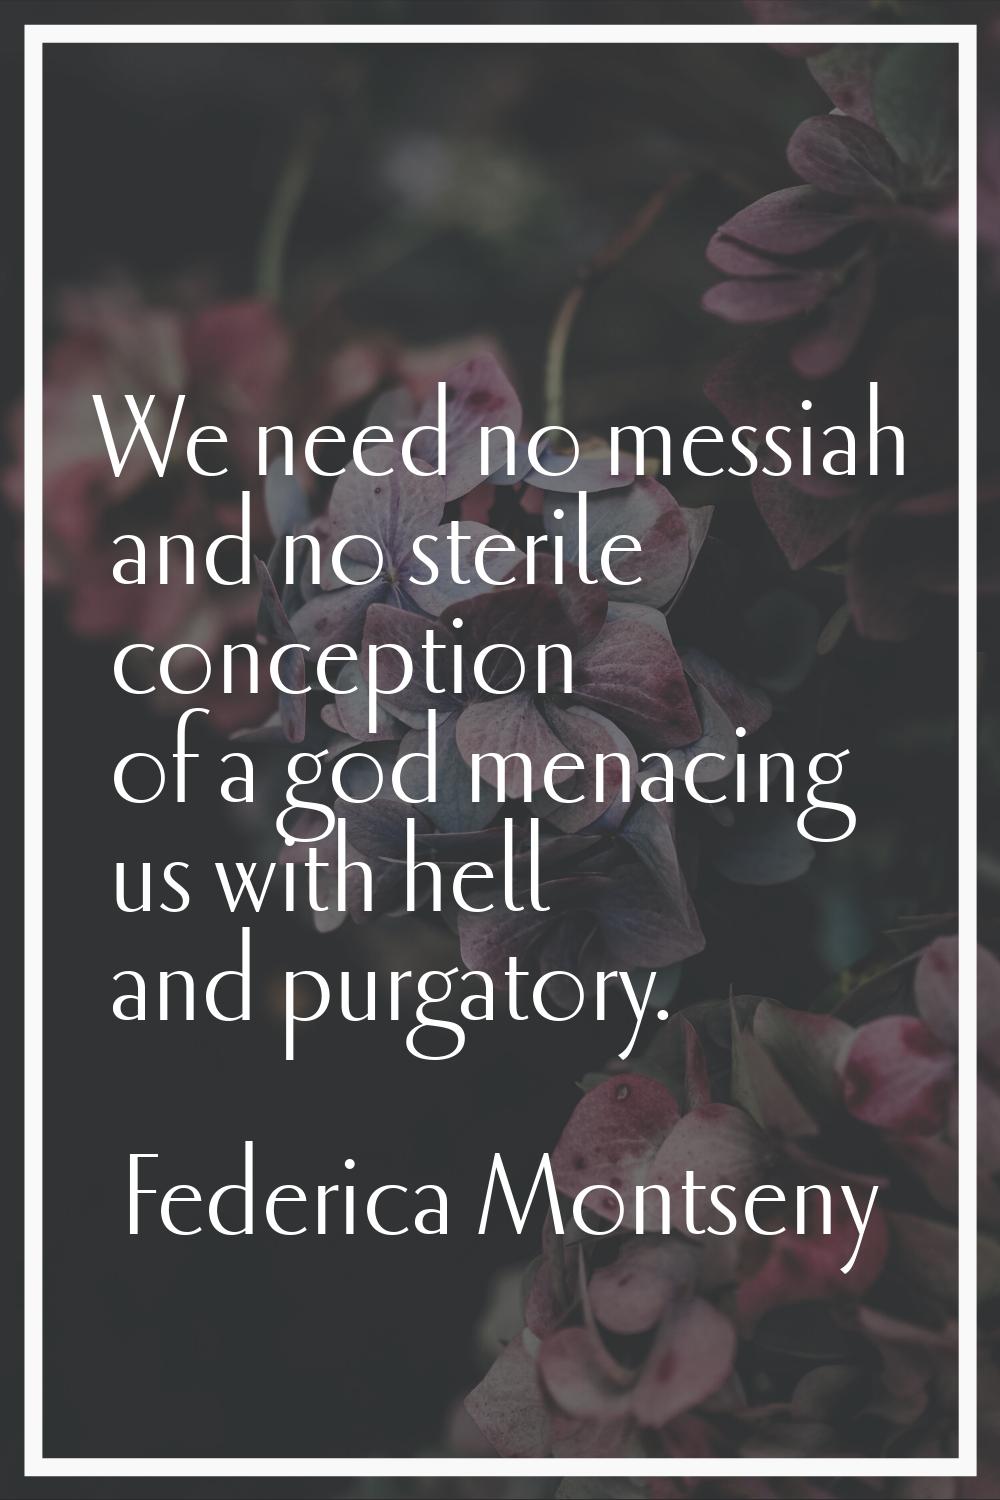 We need no messiah and no sterile conception of a god menacing us with hell and purgatory.